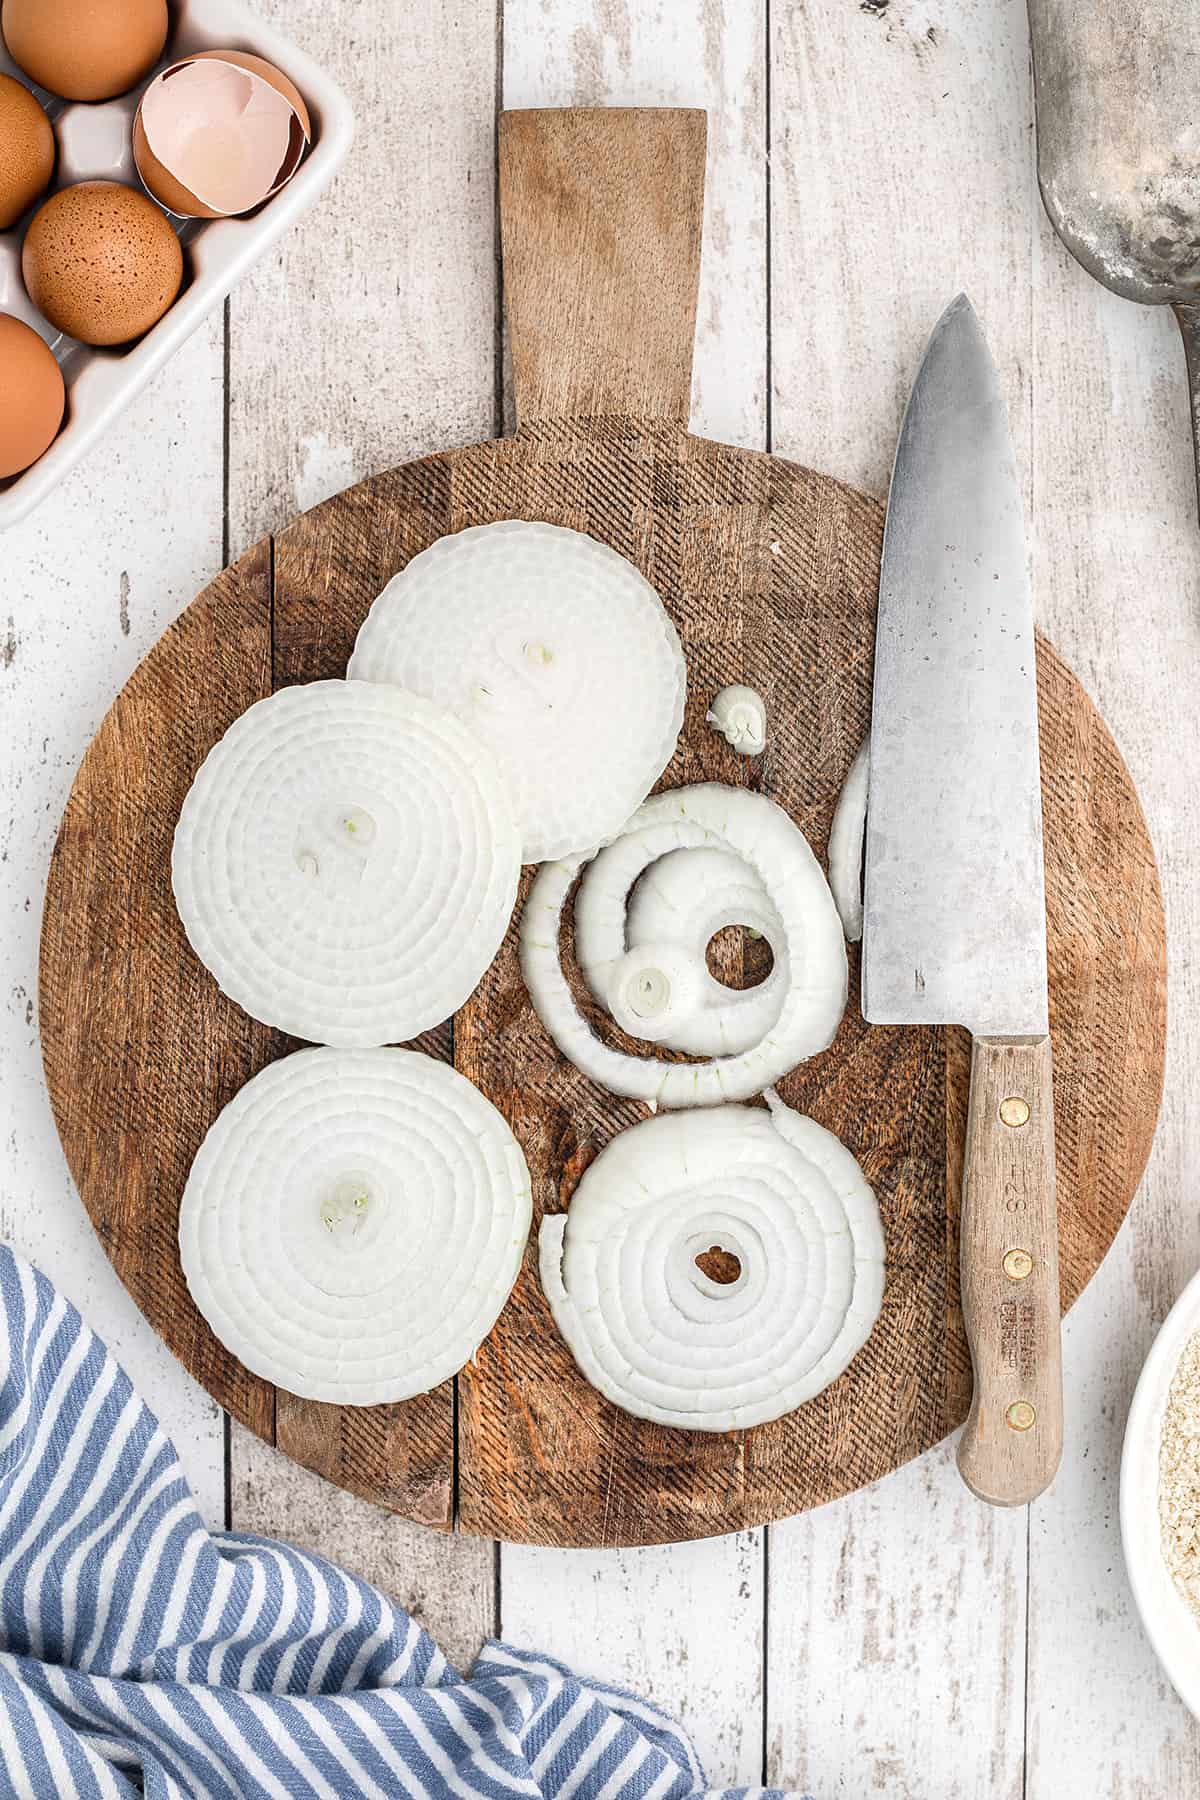 Sliced onion and knife on a wooden board.